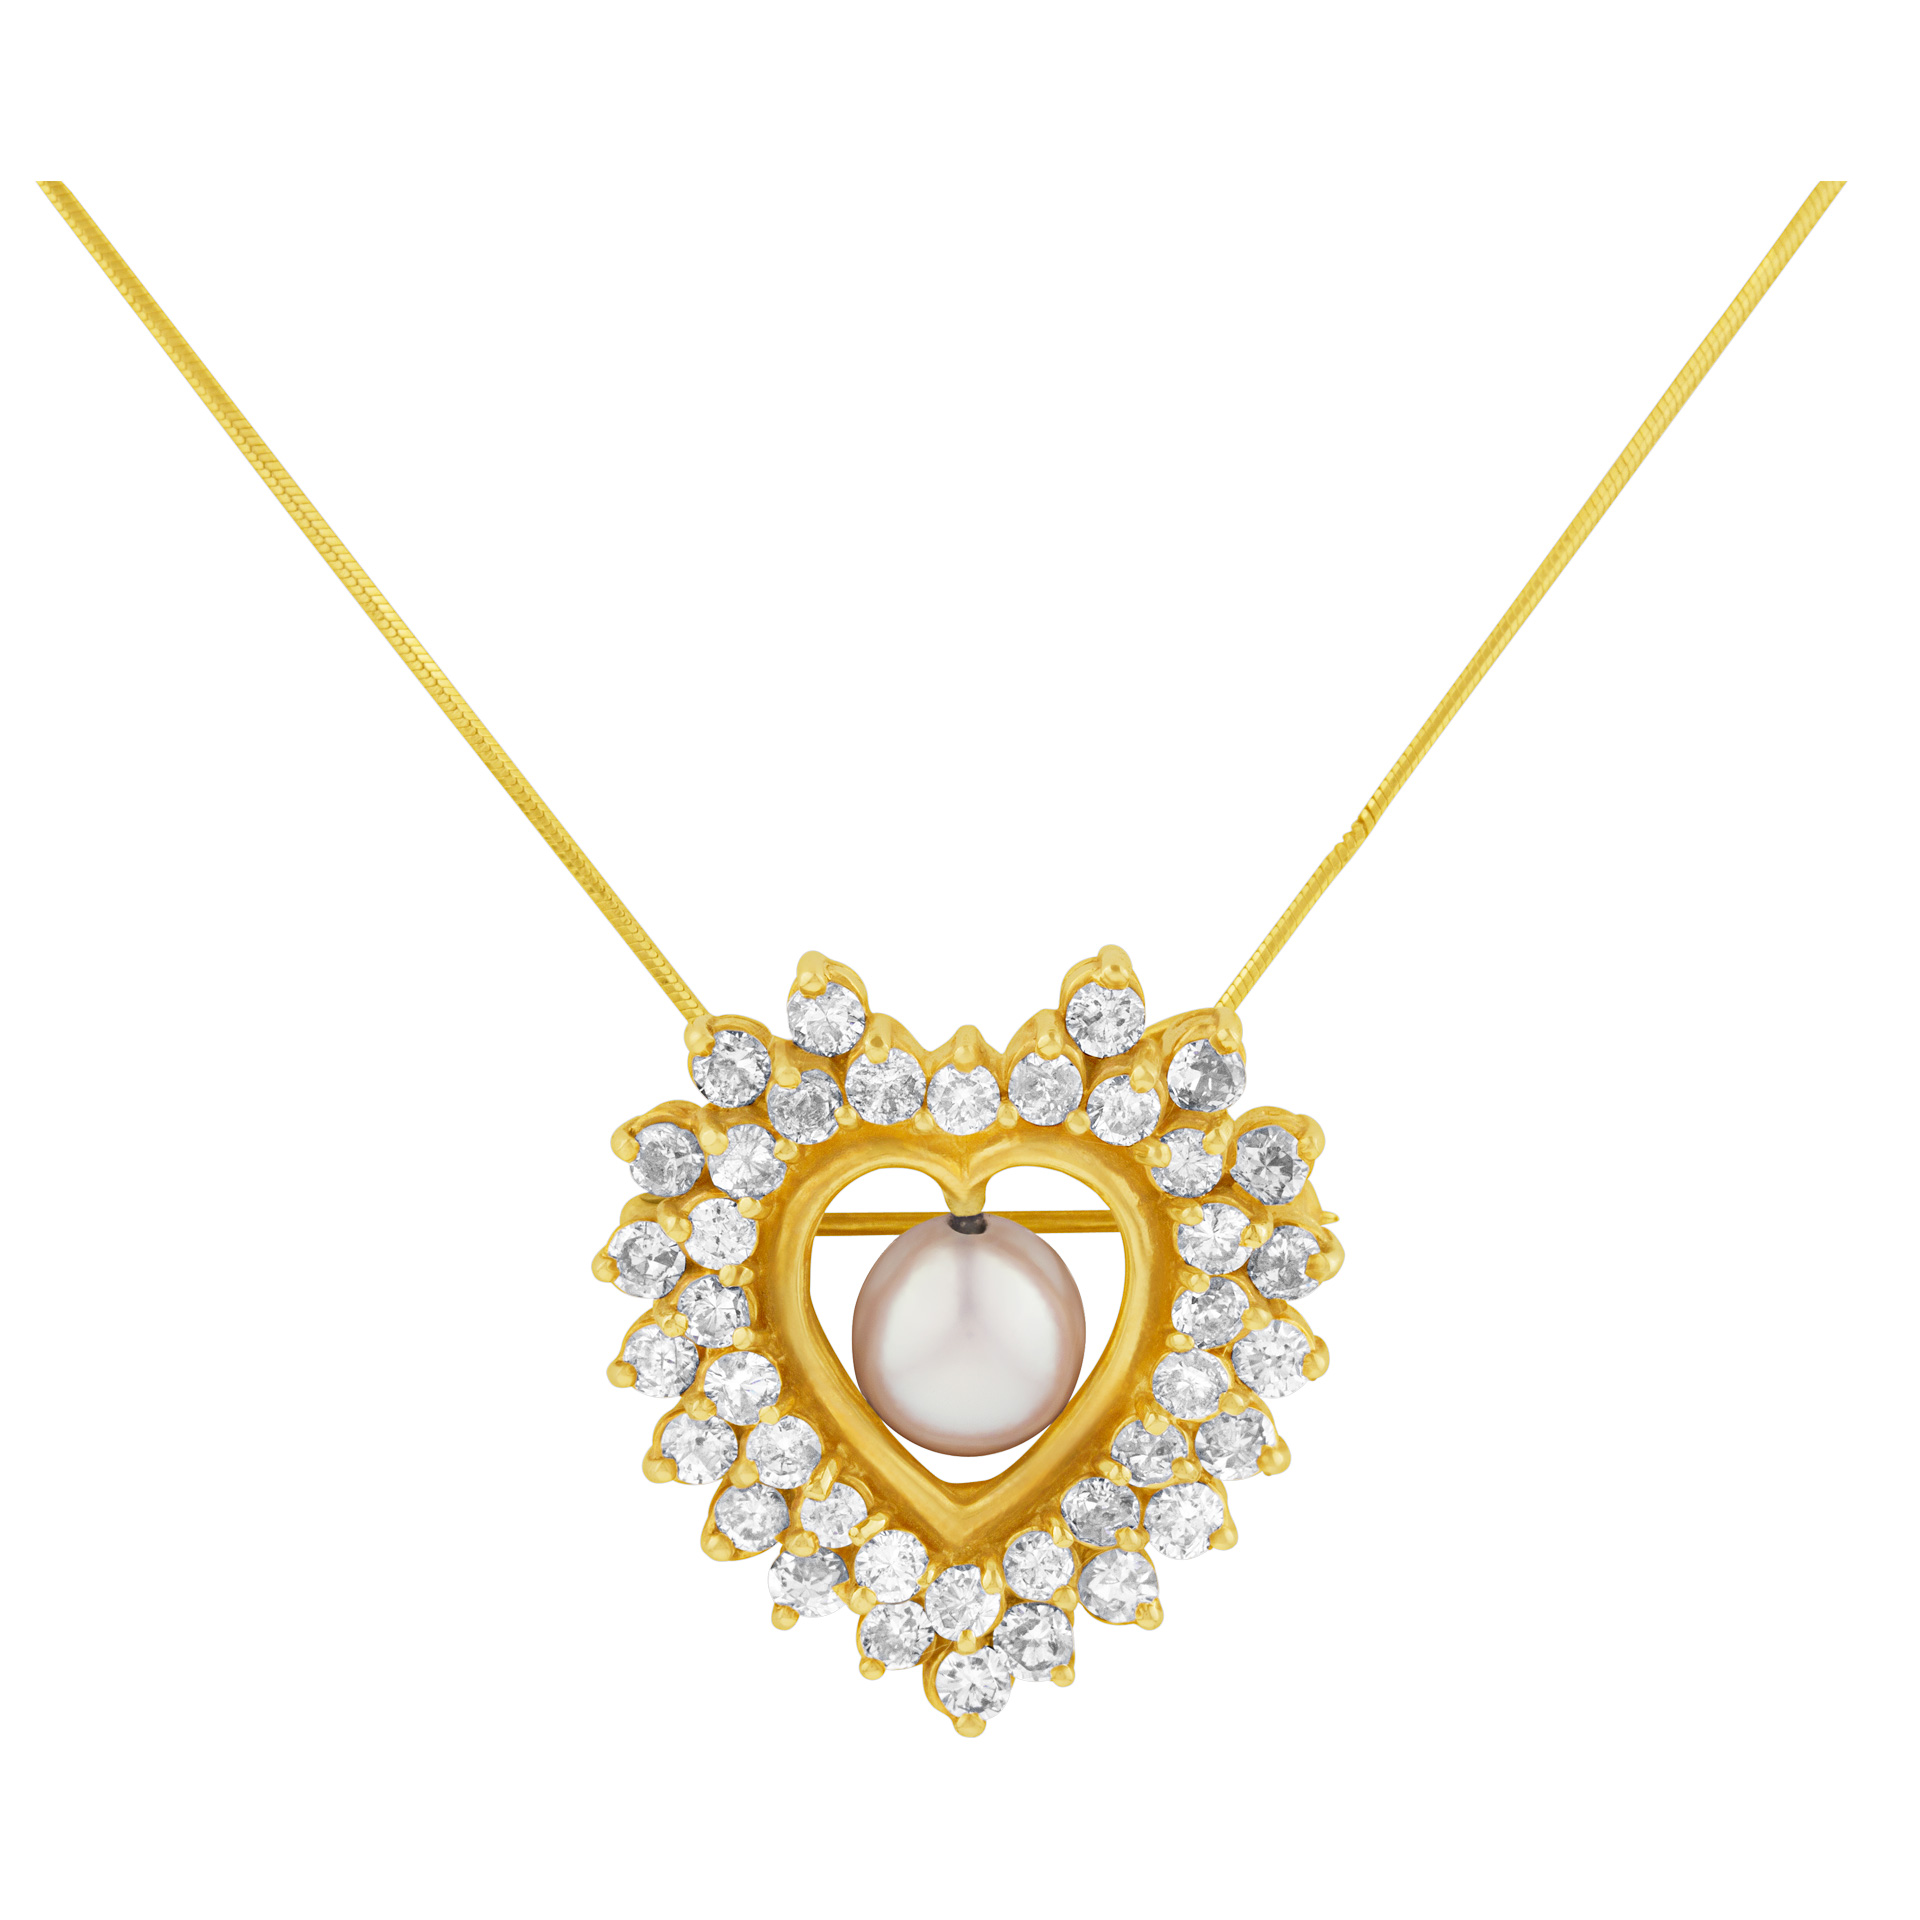 Heart shaped pearl & diamond brooch in 14k yellow gold. image 1